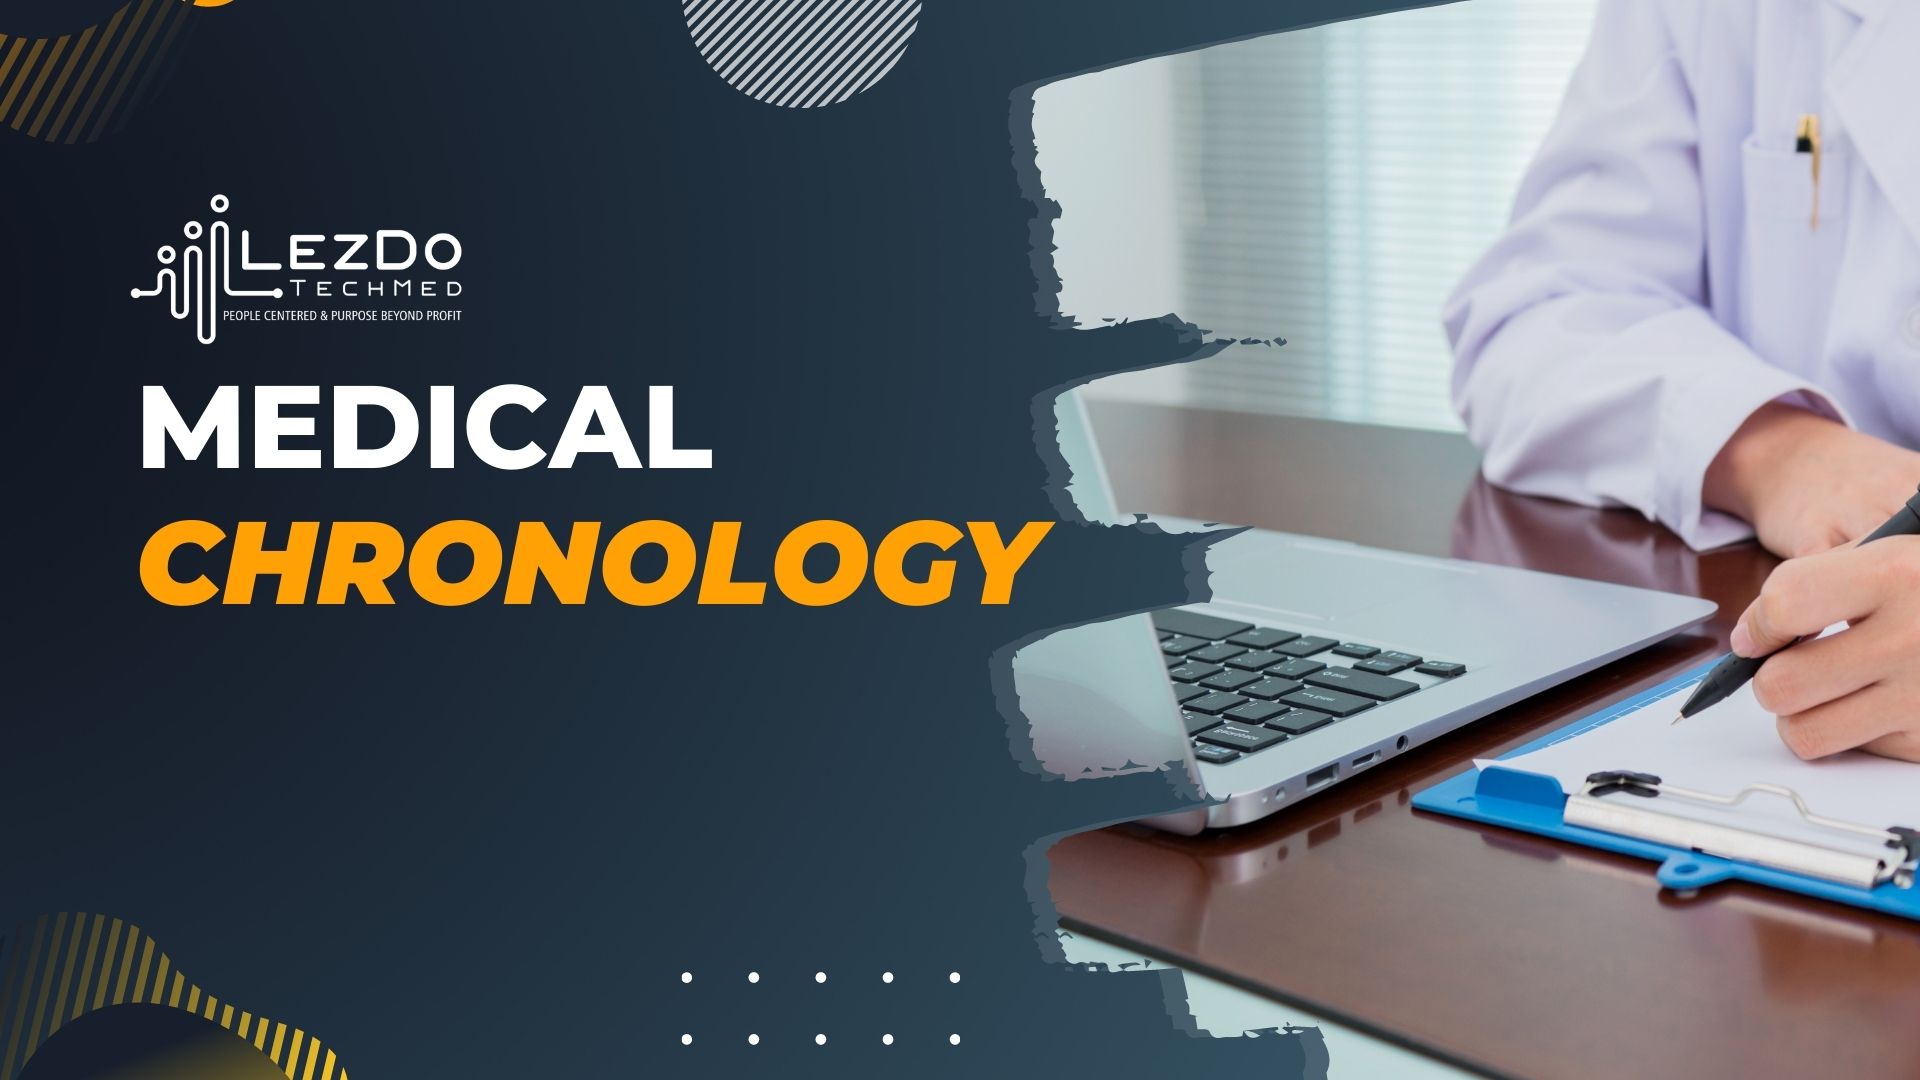 Top Medical Chronology Services with a FREE TRIAL